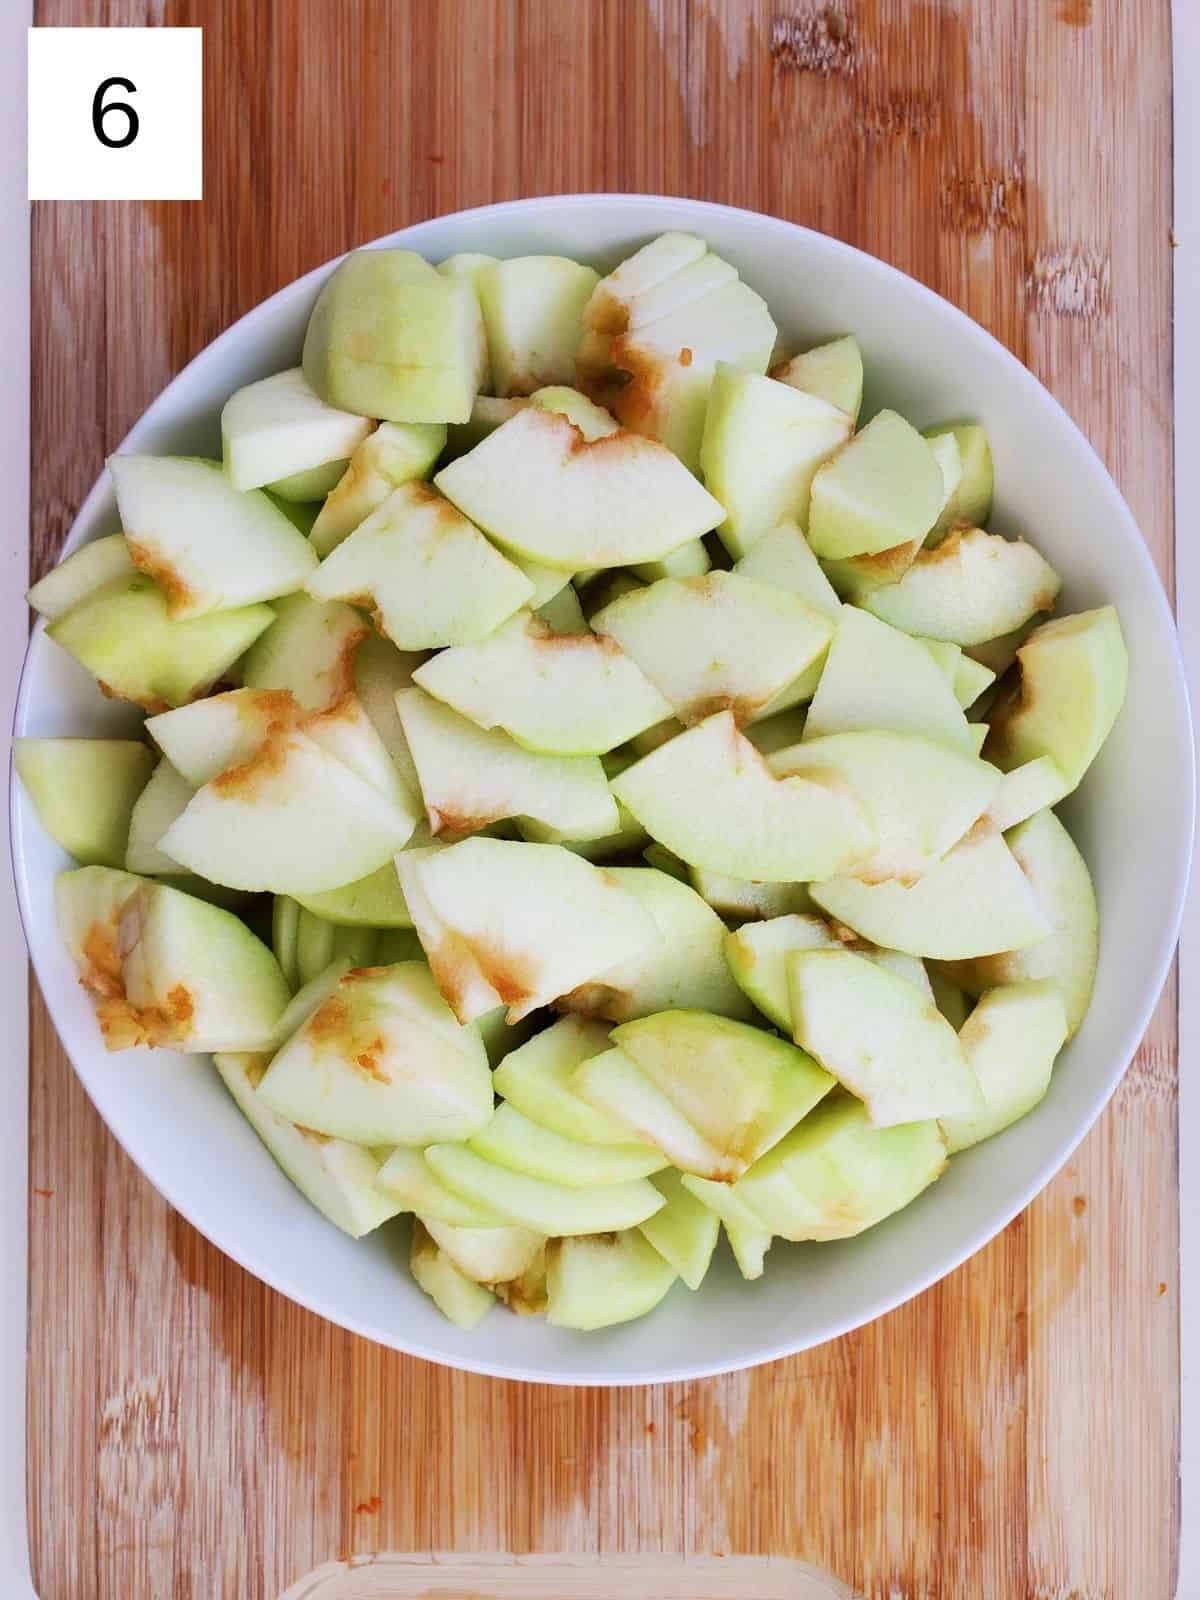 apple slices in a bowl.